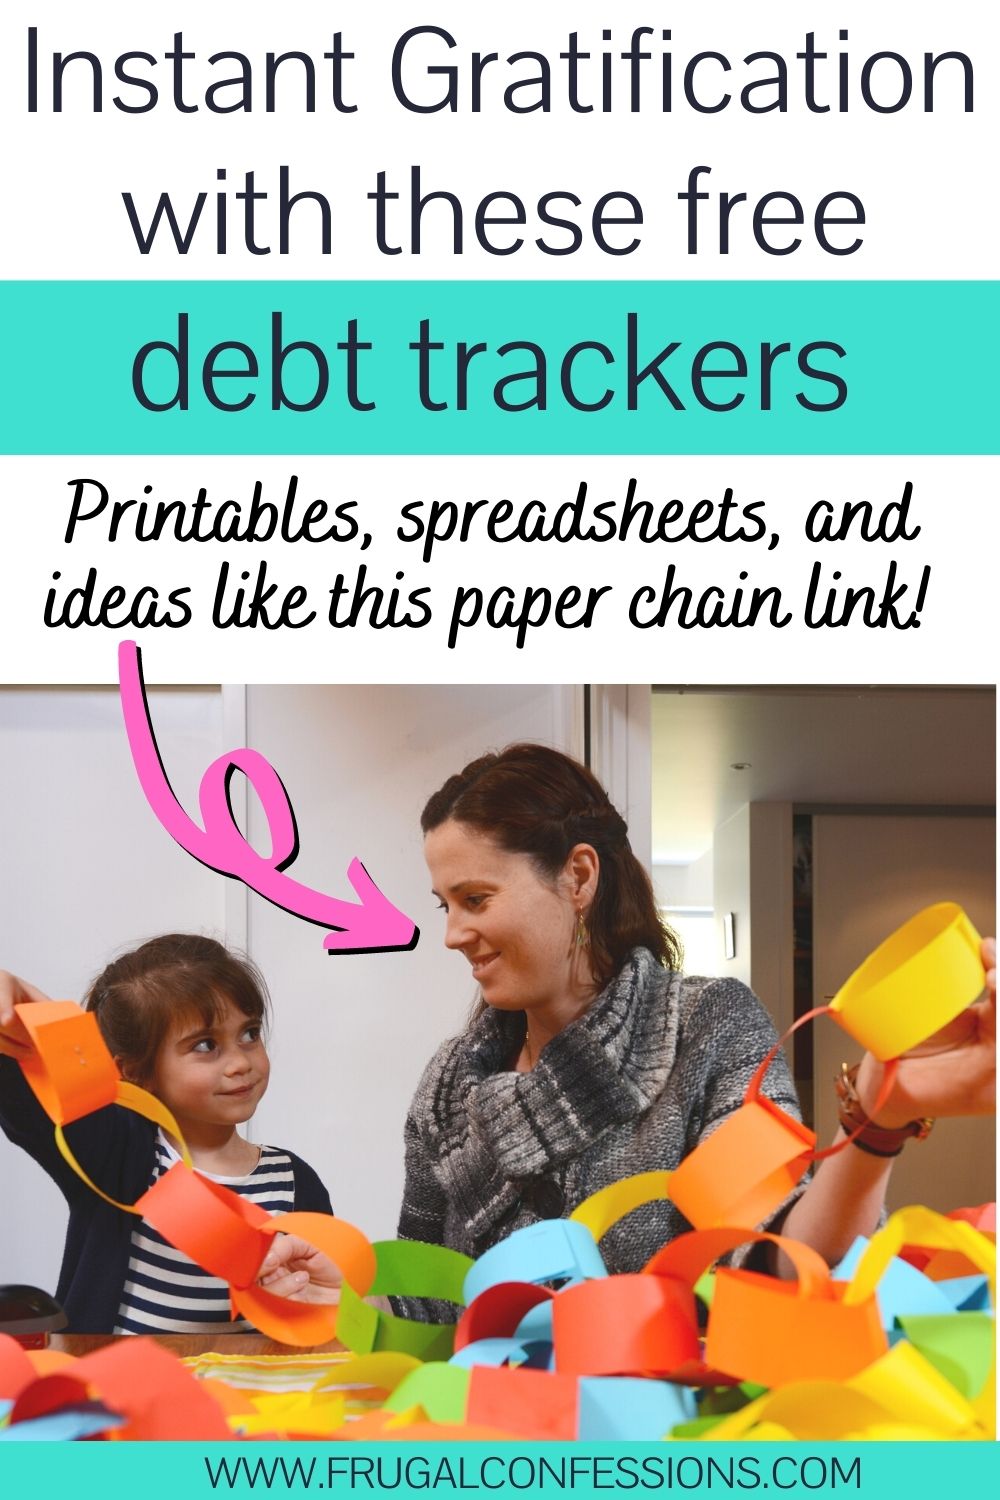 mother with daughter, making paper chain debt payoff visual, text overlay 